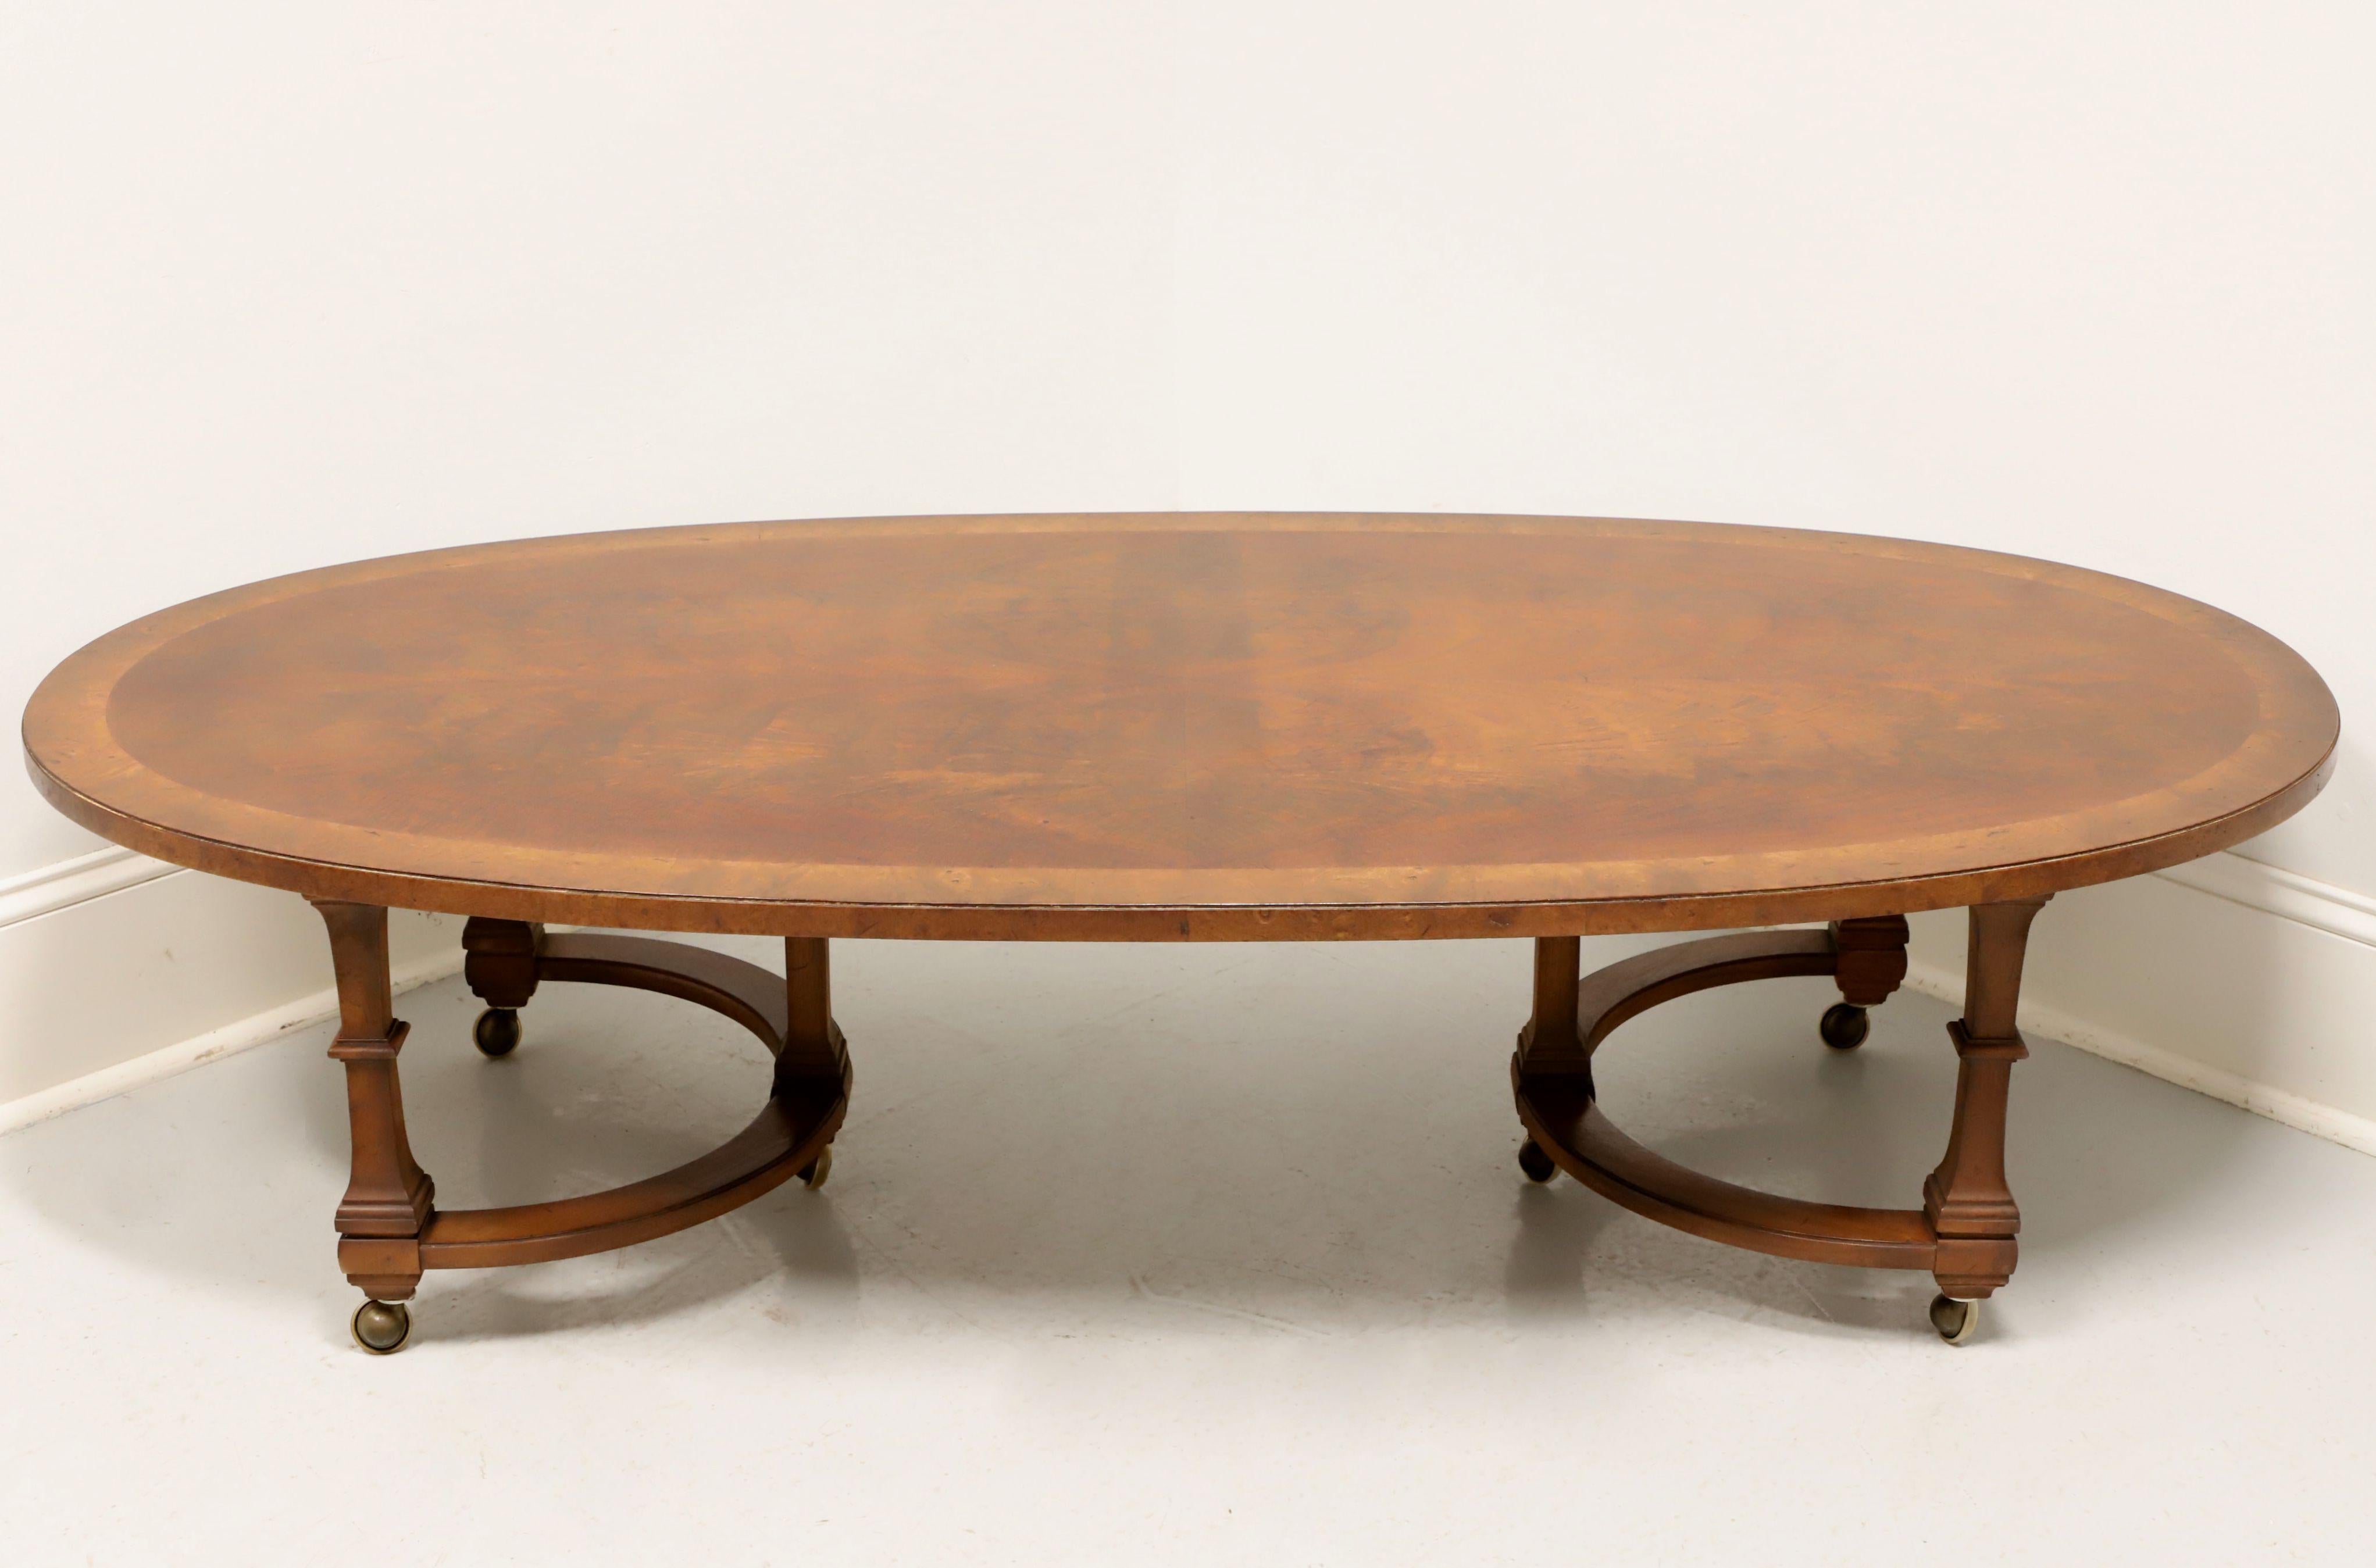 A Neoclassical style oval coffee table by Tomlinson Furniture. Mahogany with their Nutmeg finish, flame mahogany top with burlwood banding, three column like legs affixed to 